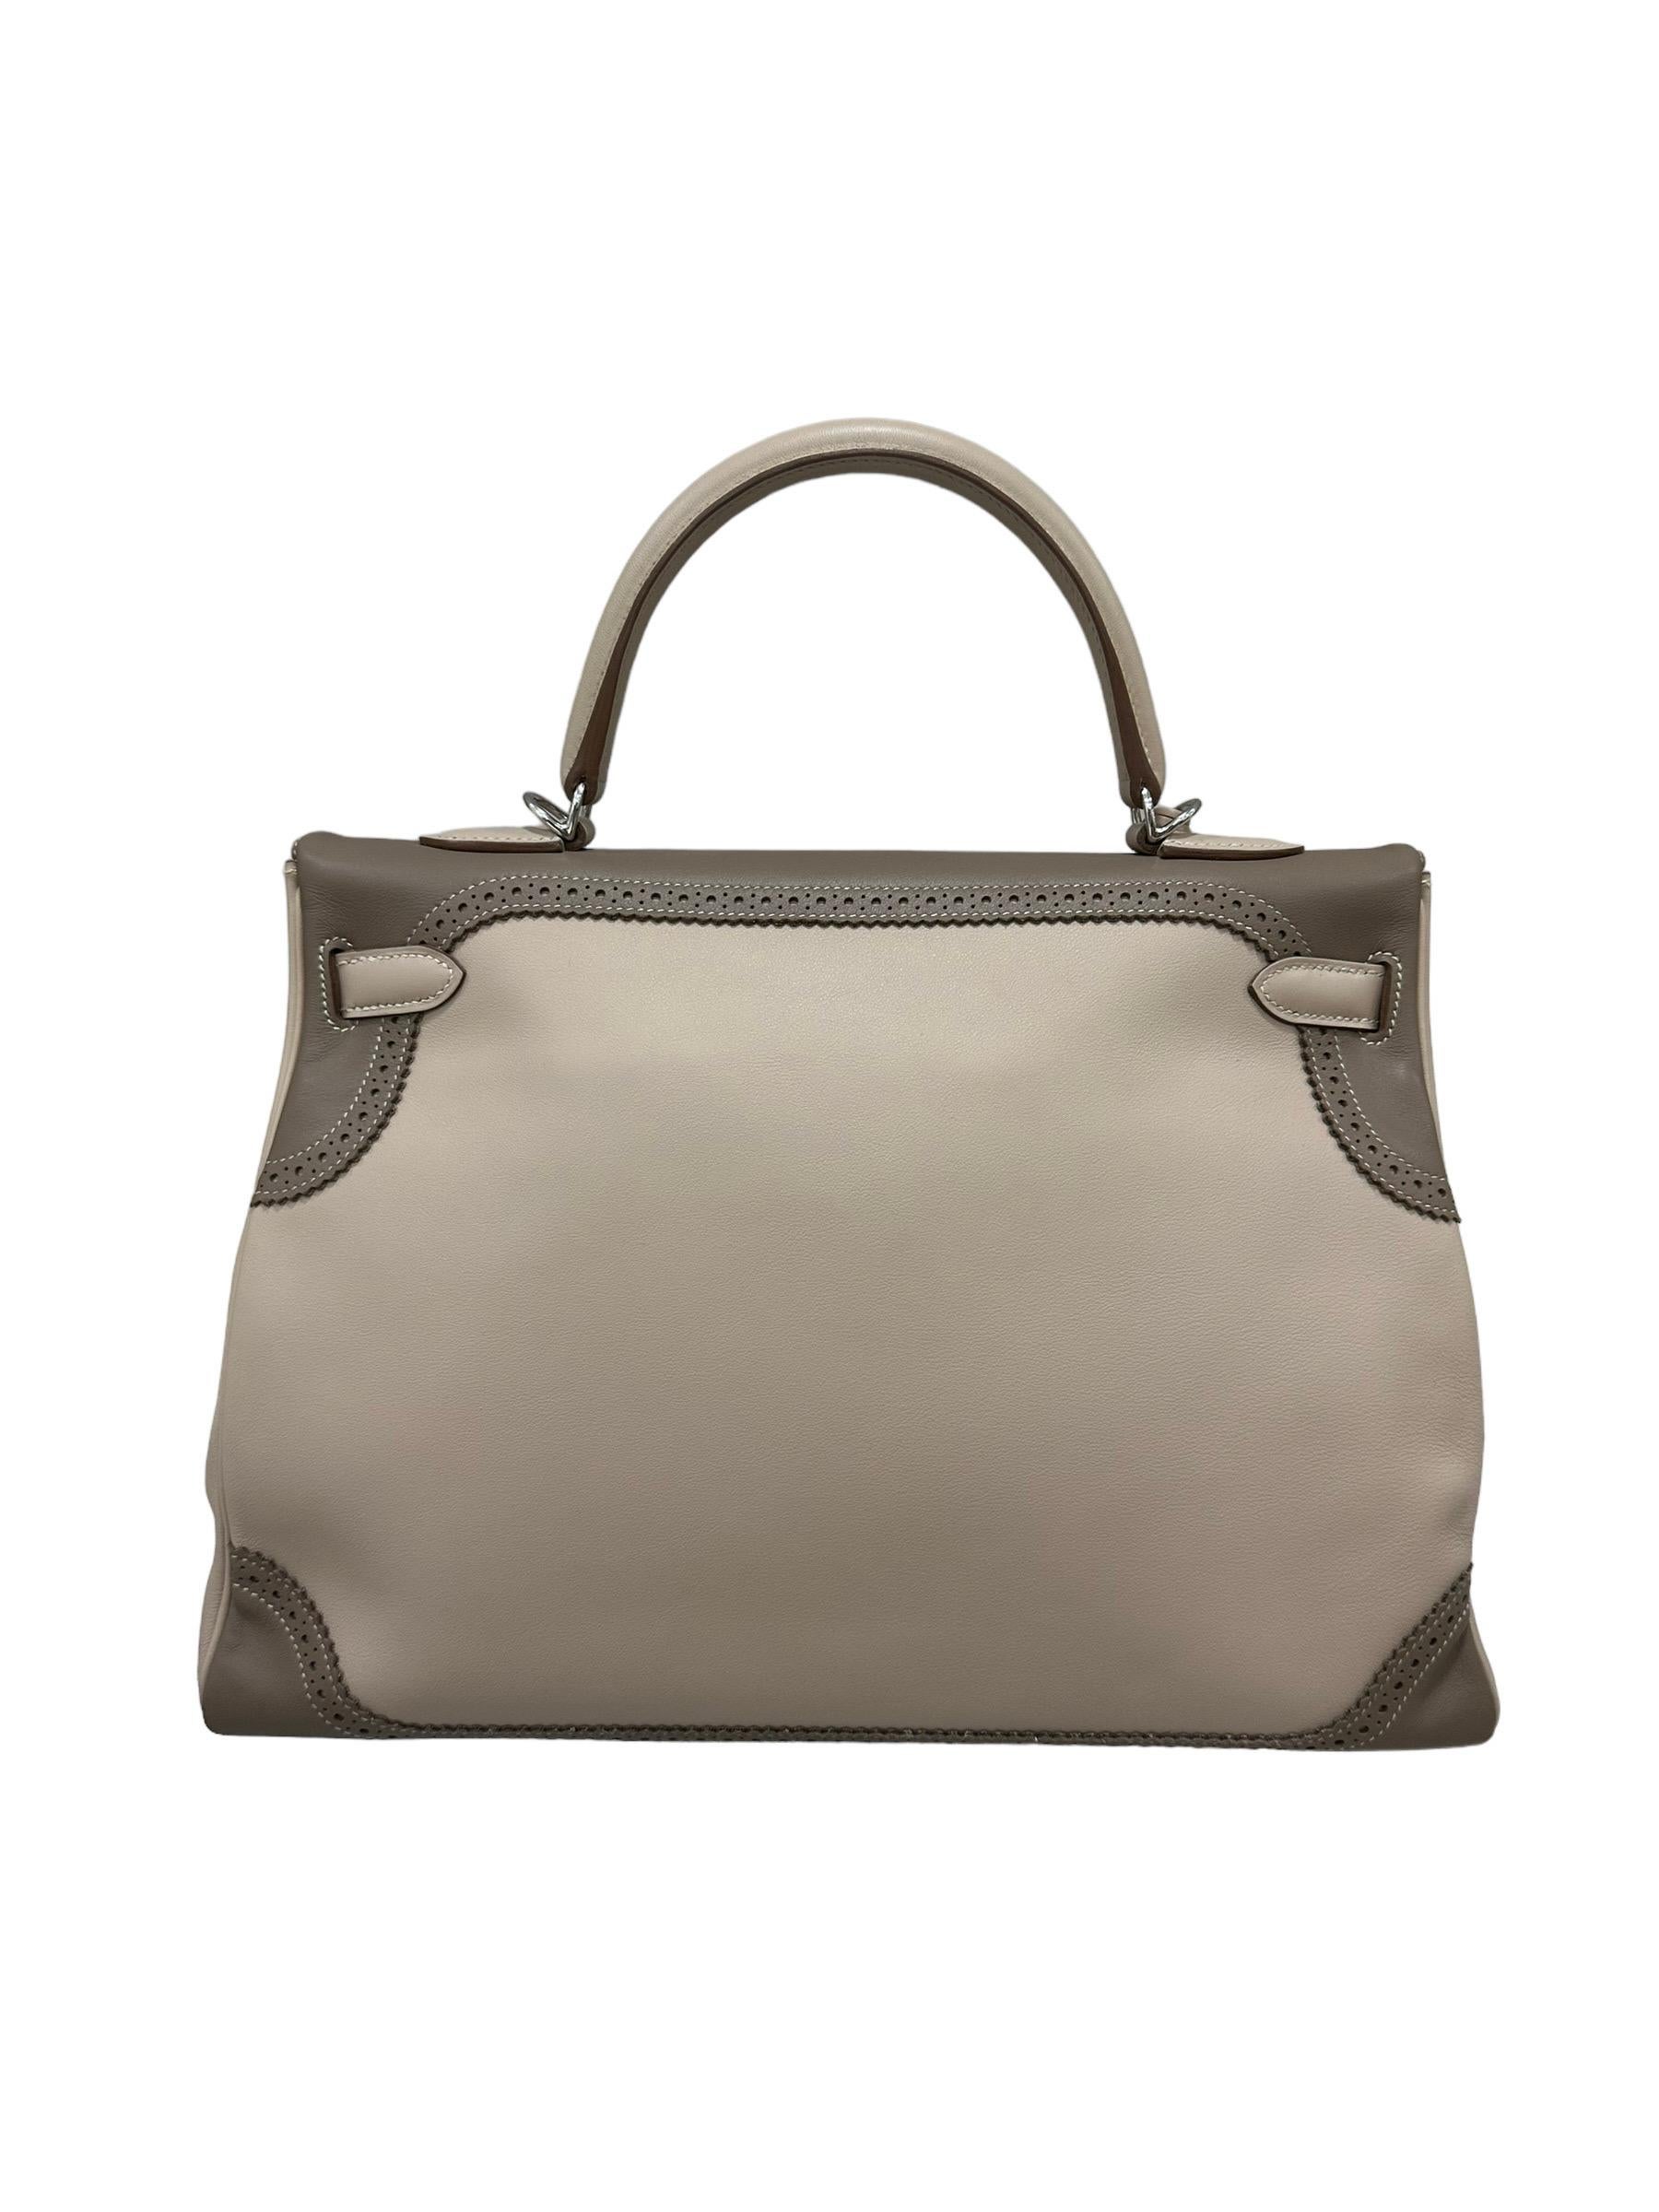 2012 Hermès Kelly 35 Ghillies Evercalf Craie/Taupe For Sale 3